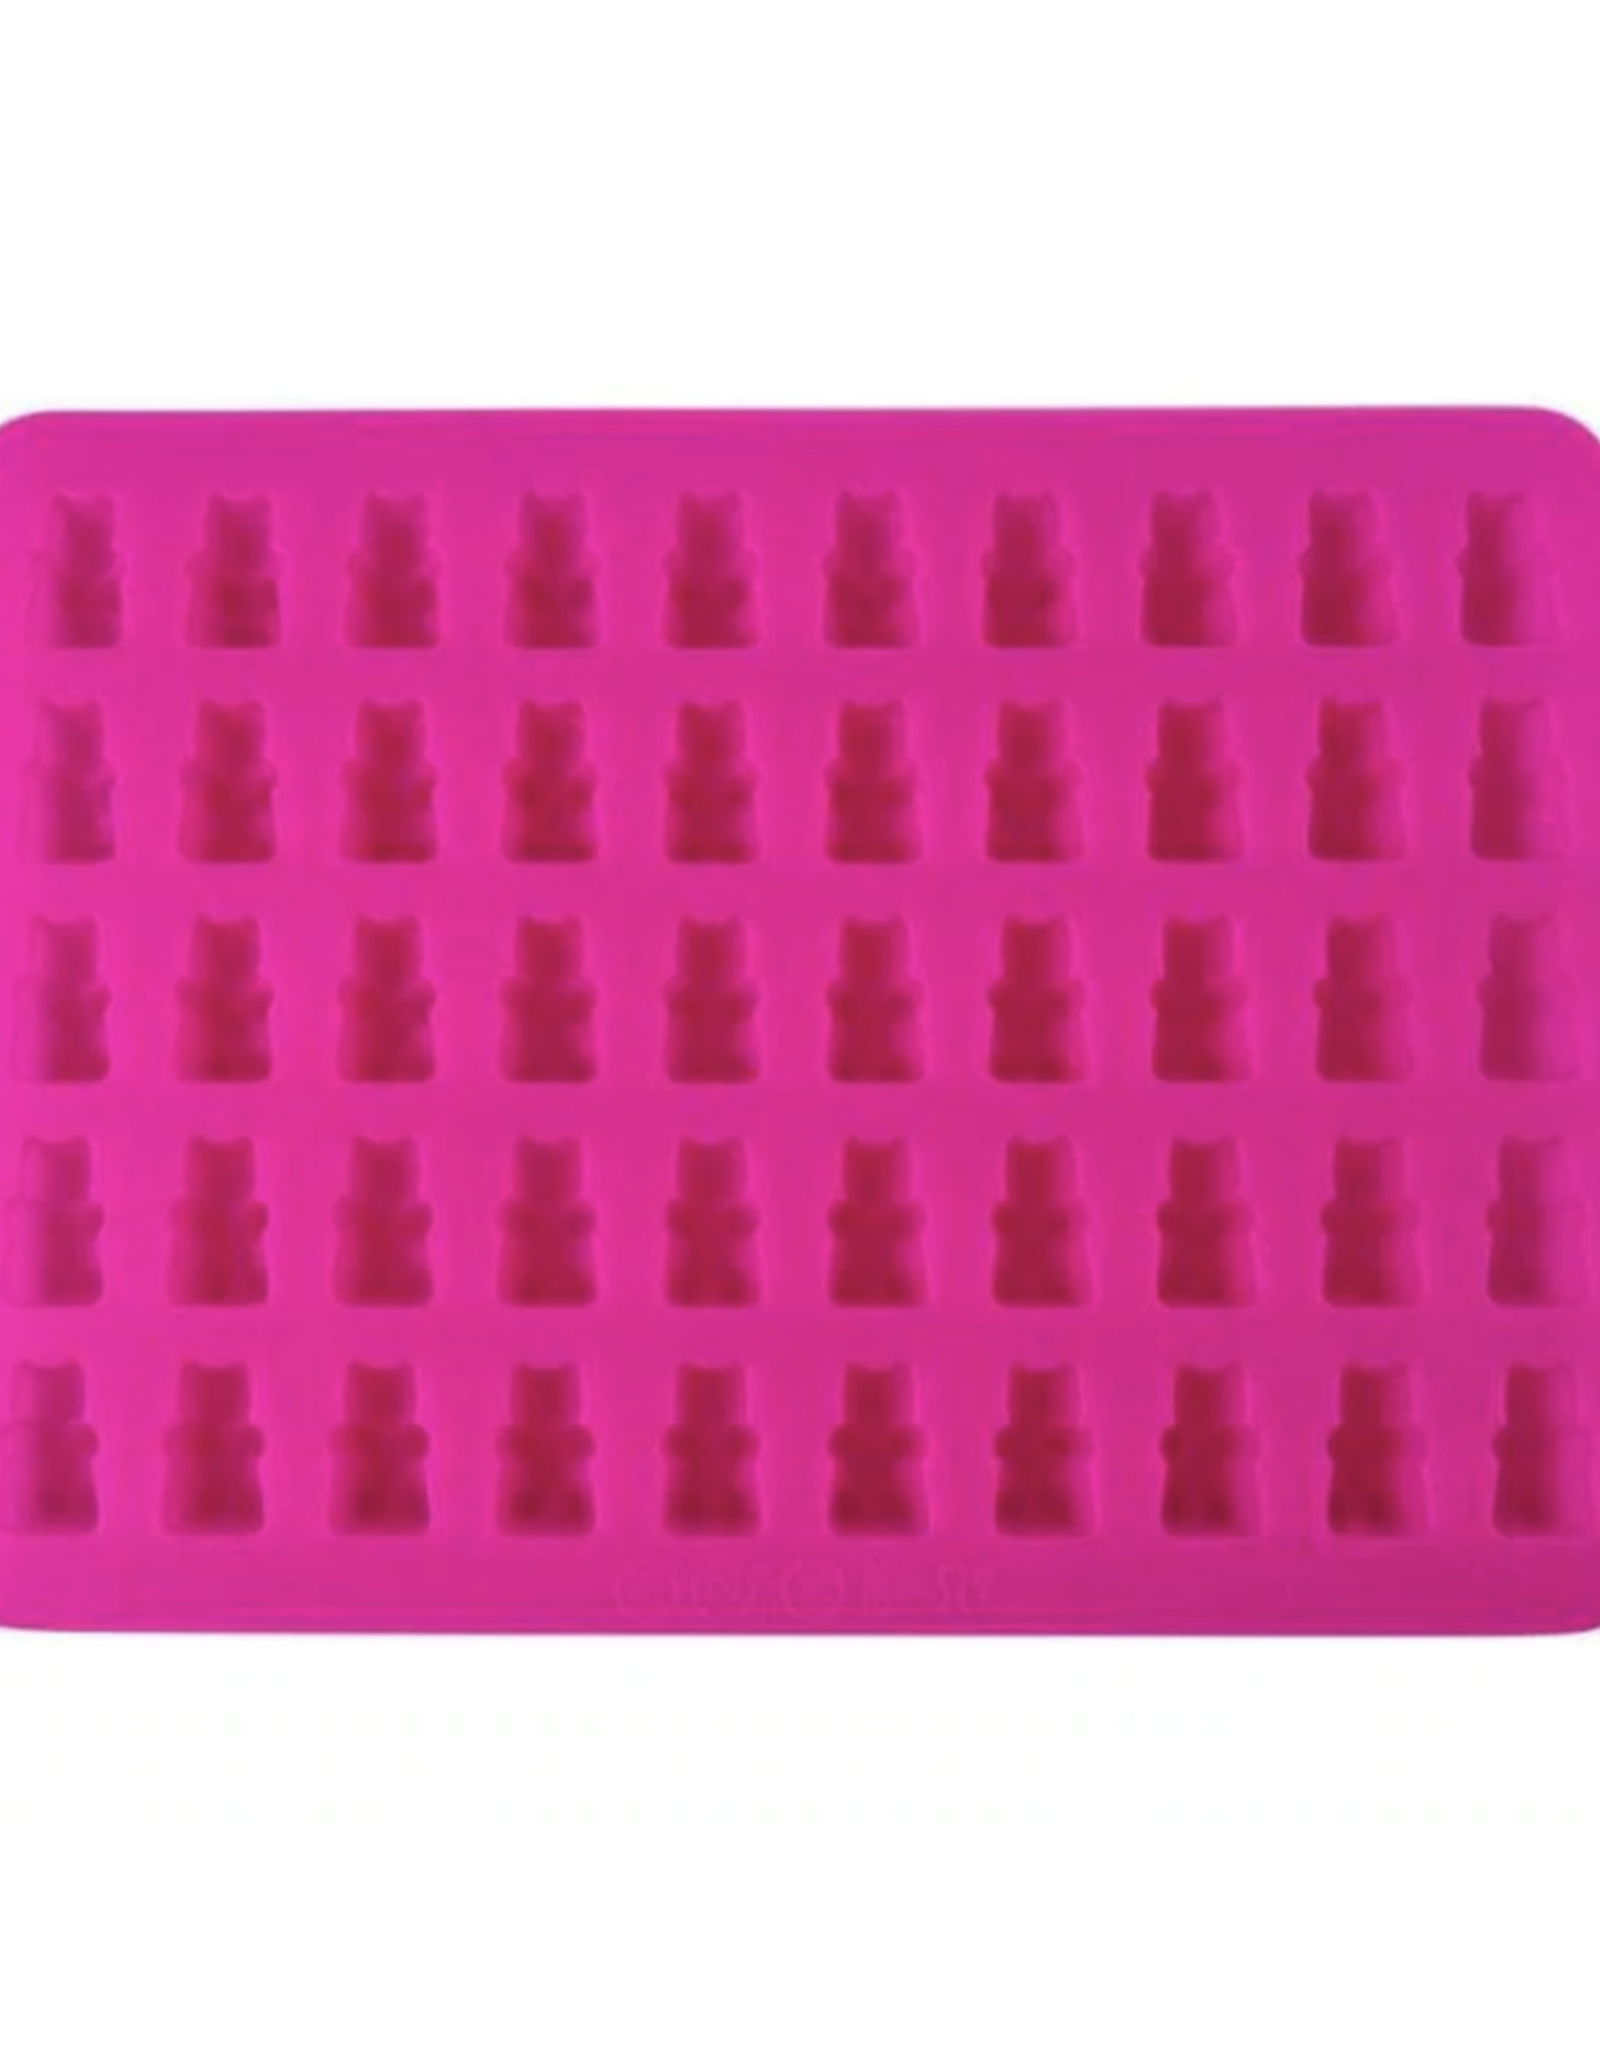 Silicone Classic Gummy Bears Mold by Dope Molds